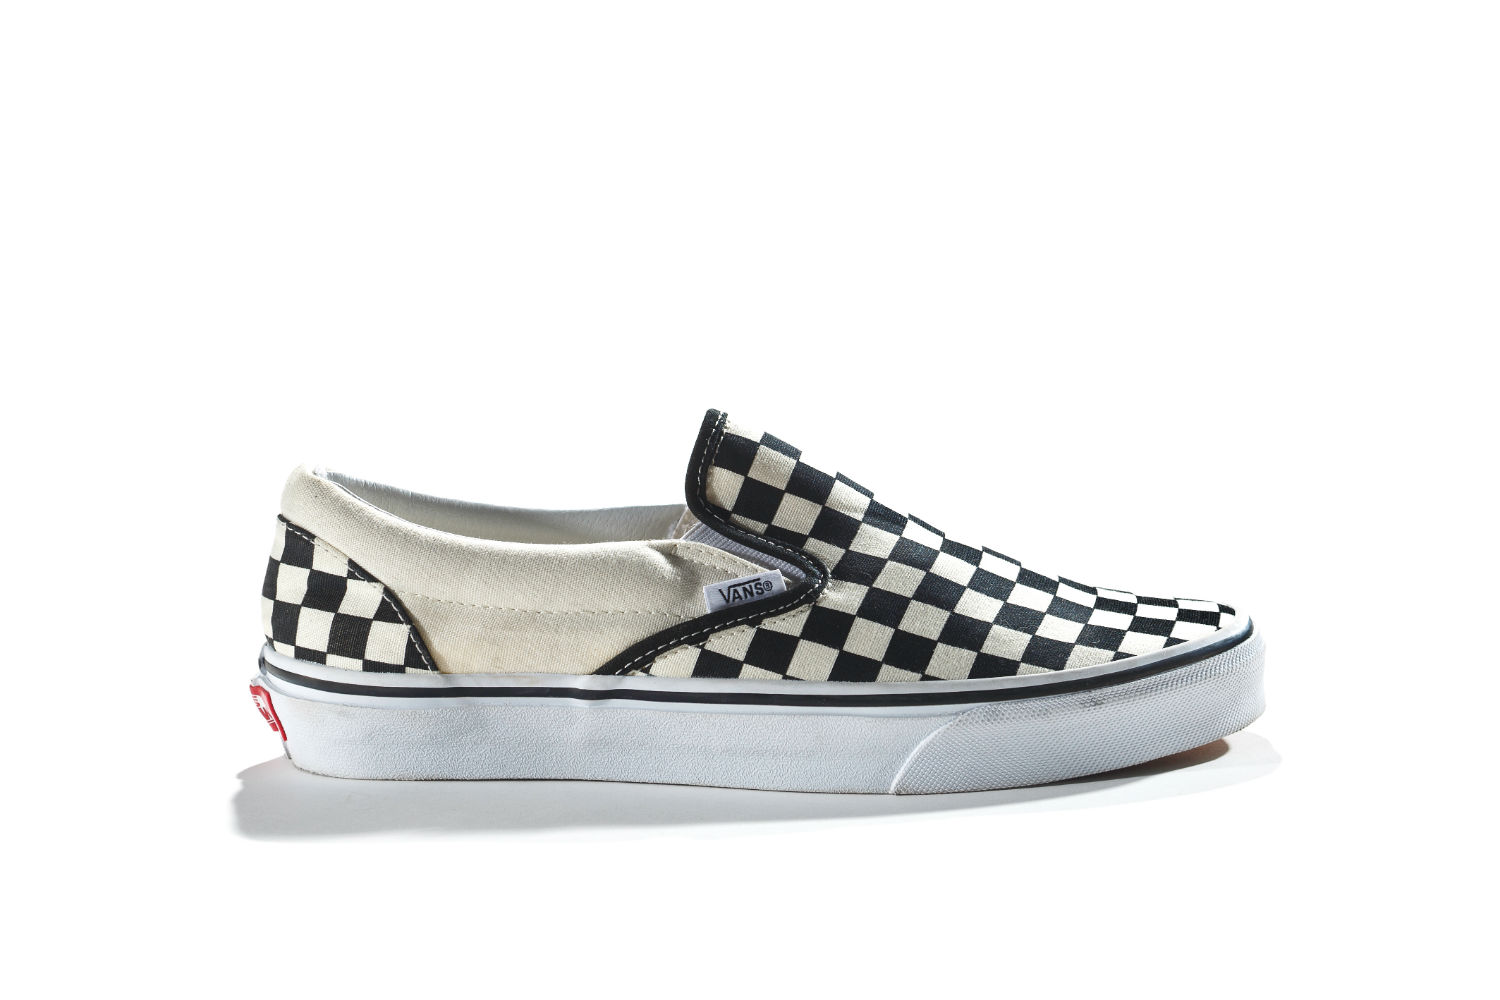 Vans Checkerboard Slip-On, 2014 retro of 1980s Collection of the Bata Shoe Museum, Gift of Vans Photo: Ron Wood Courtesy American Federation of Arts/Bata Shoe Museum